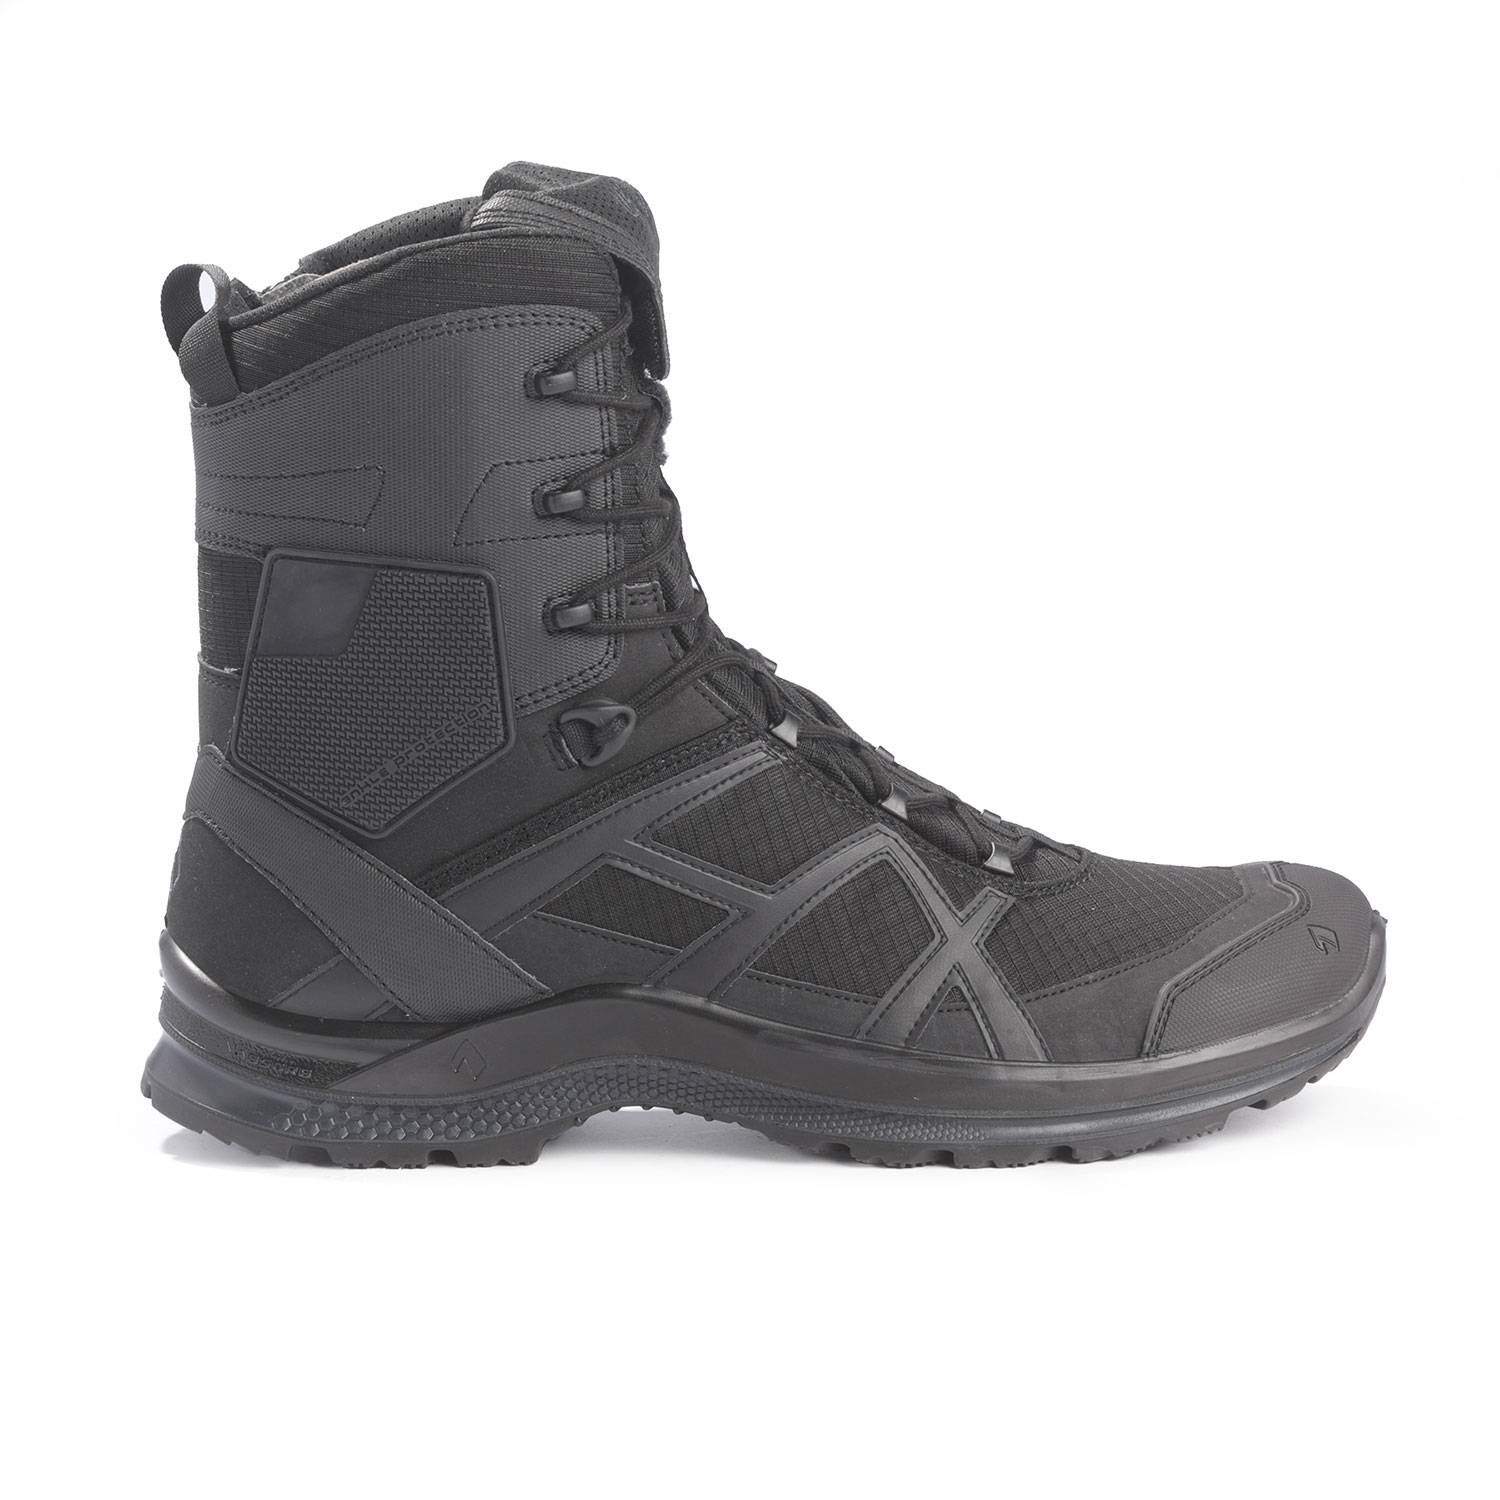 Haix Black Eagle Athletic 2.0 T High 8" Side Zip Boots